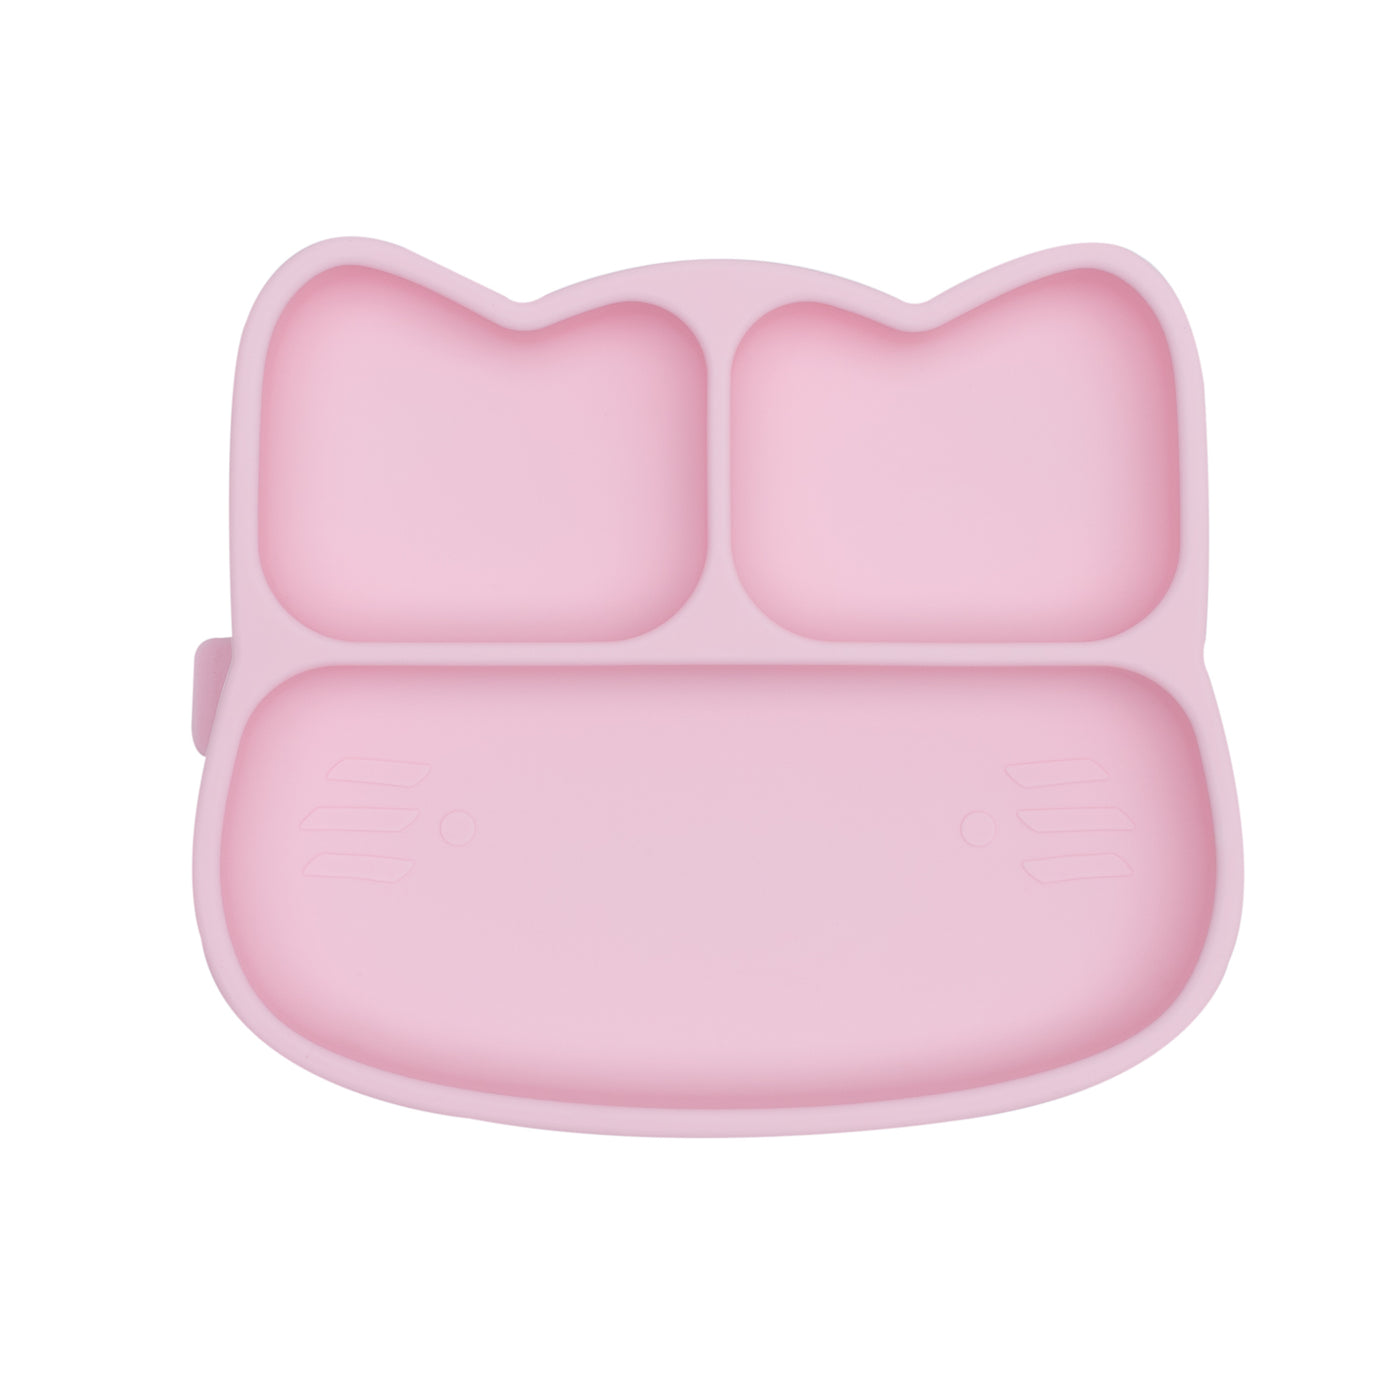 We Might Be Tiny Cat Stickie Plate - Powder Pink